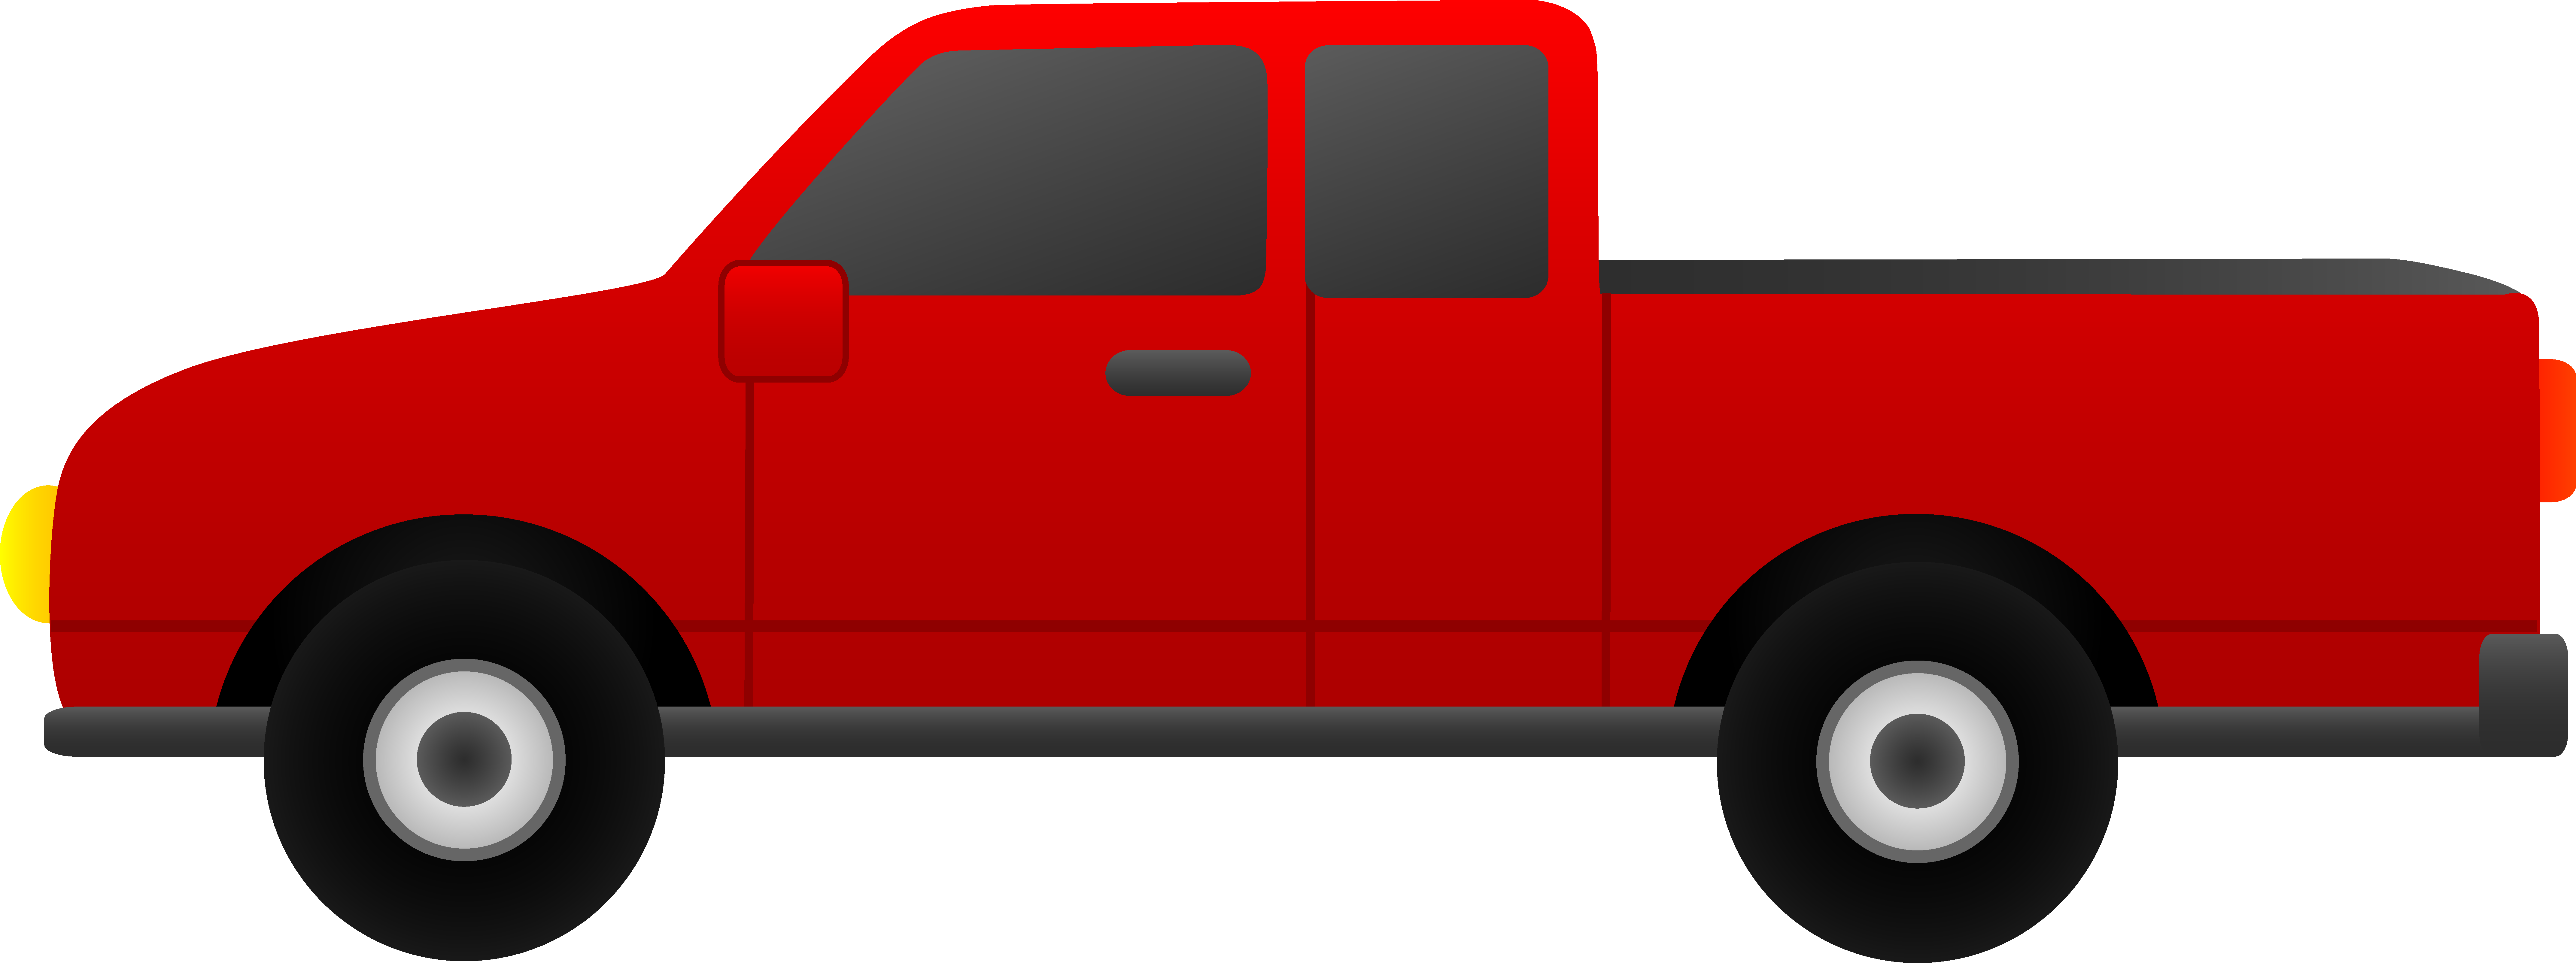 Free Cartoon Truck Images, Download Free Cartoon Truck Images png images,  Free ClipArts on Clipart Library